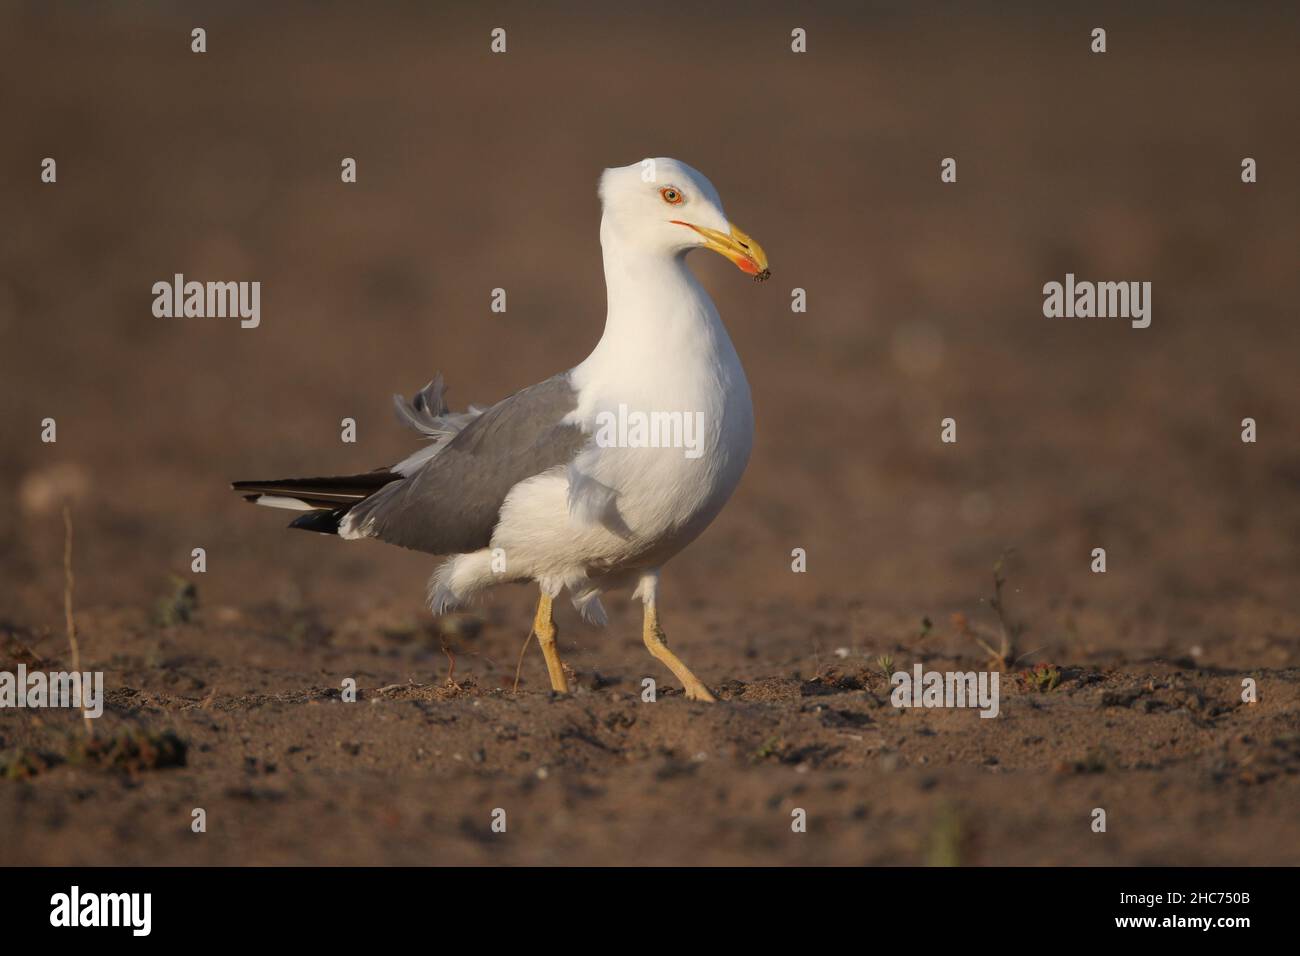 Yellow legged gulls on Lanzarote are often found in large numbers on the farmed desert soils searching for invertebrate prey. Stock Photo